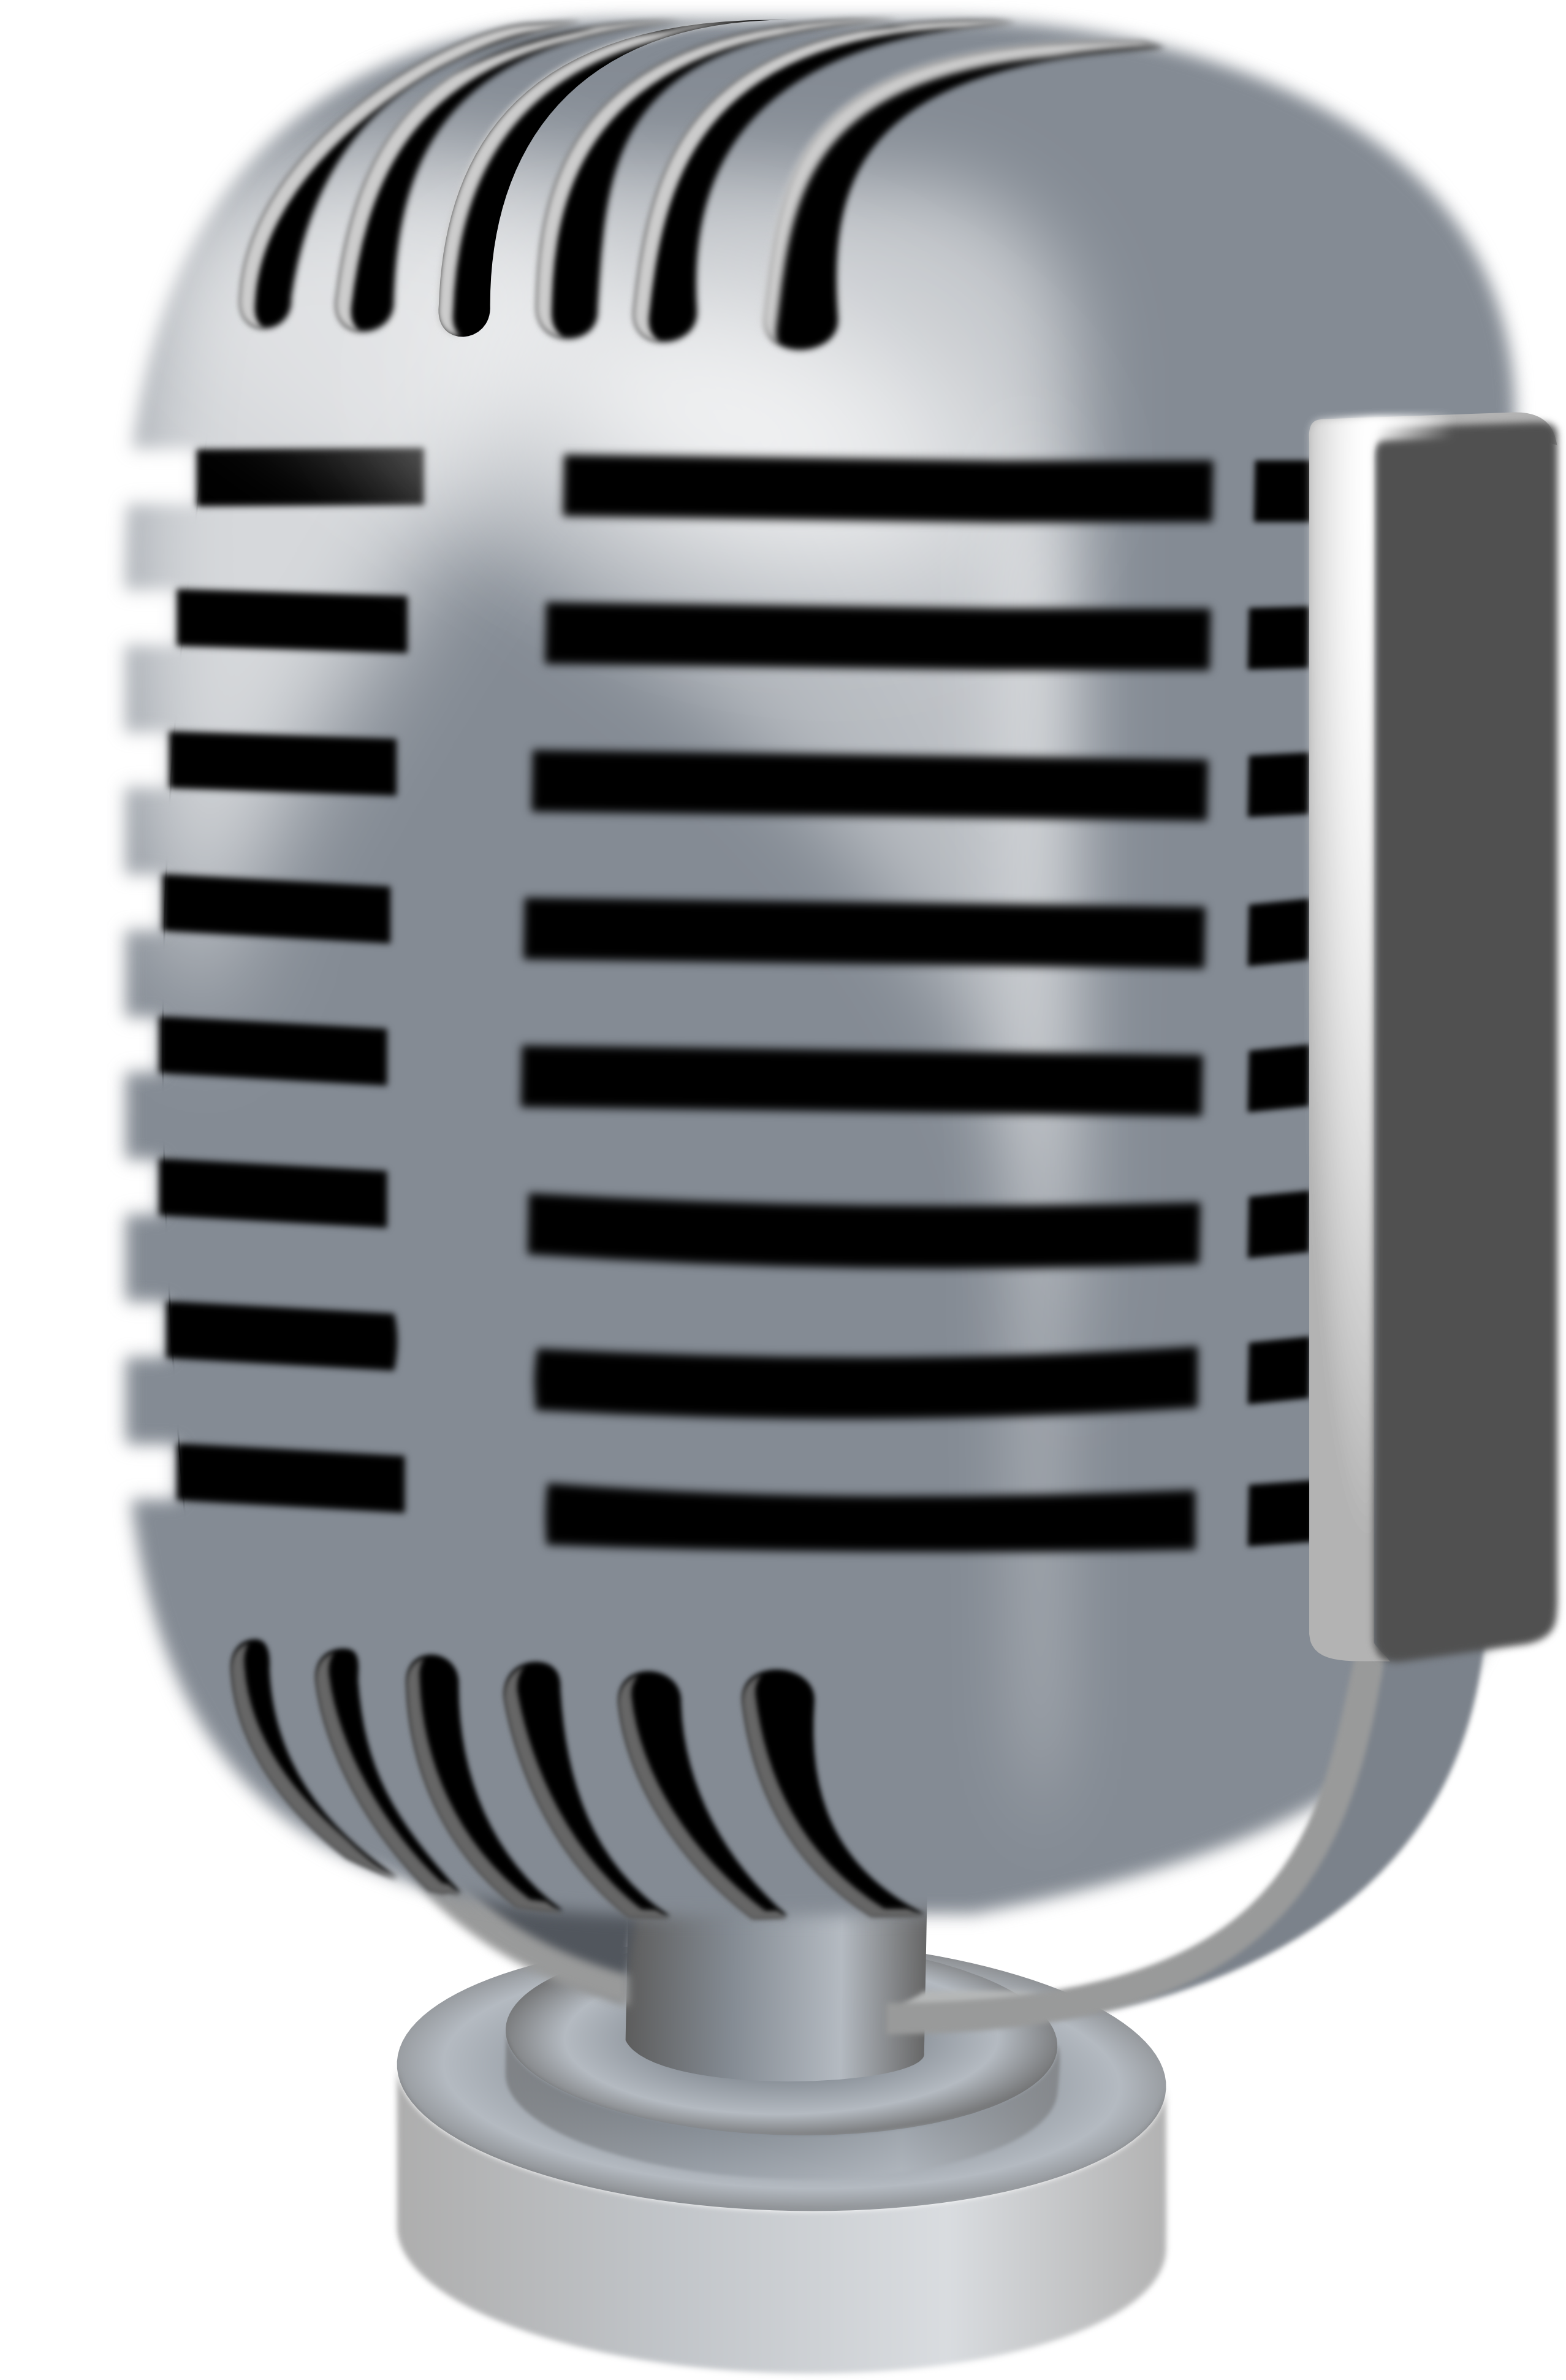 Boobaloo Old Style Microphone Black White Line Art Scalable Vector